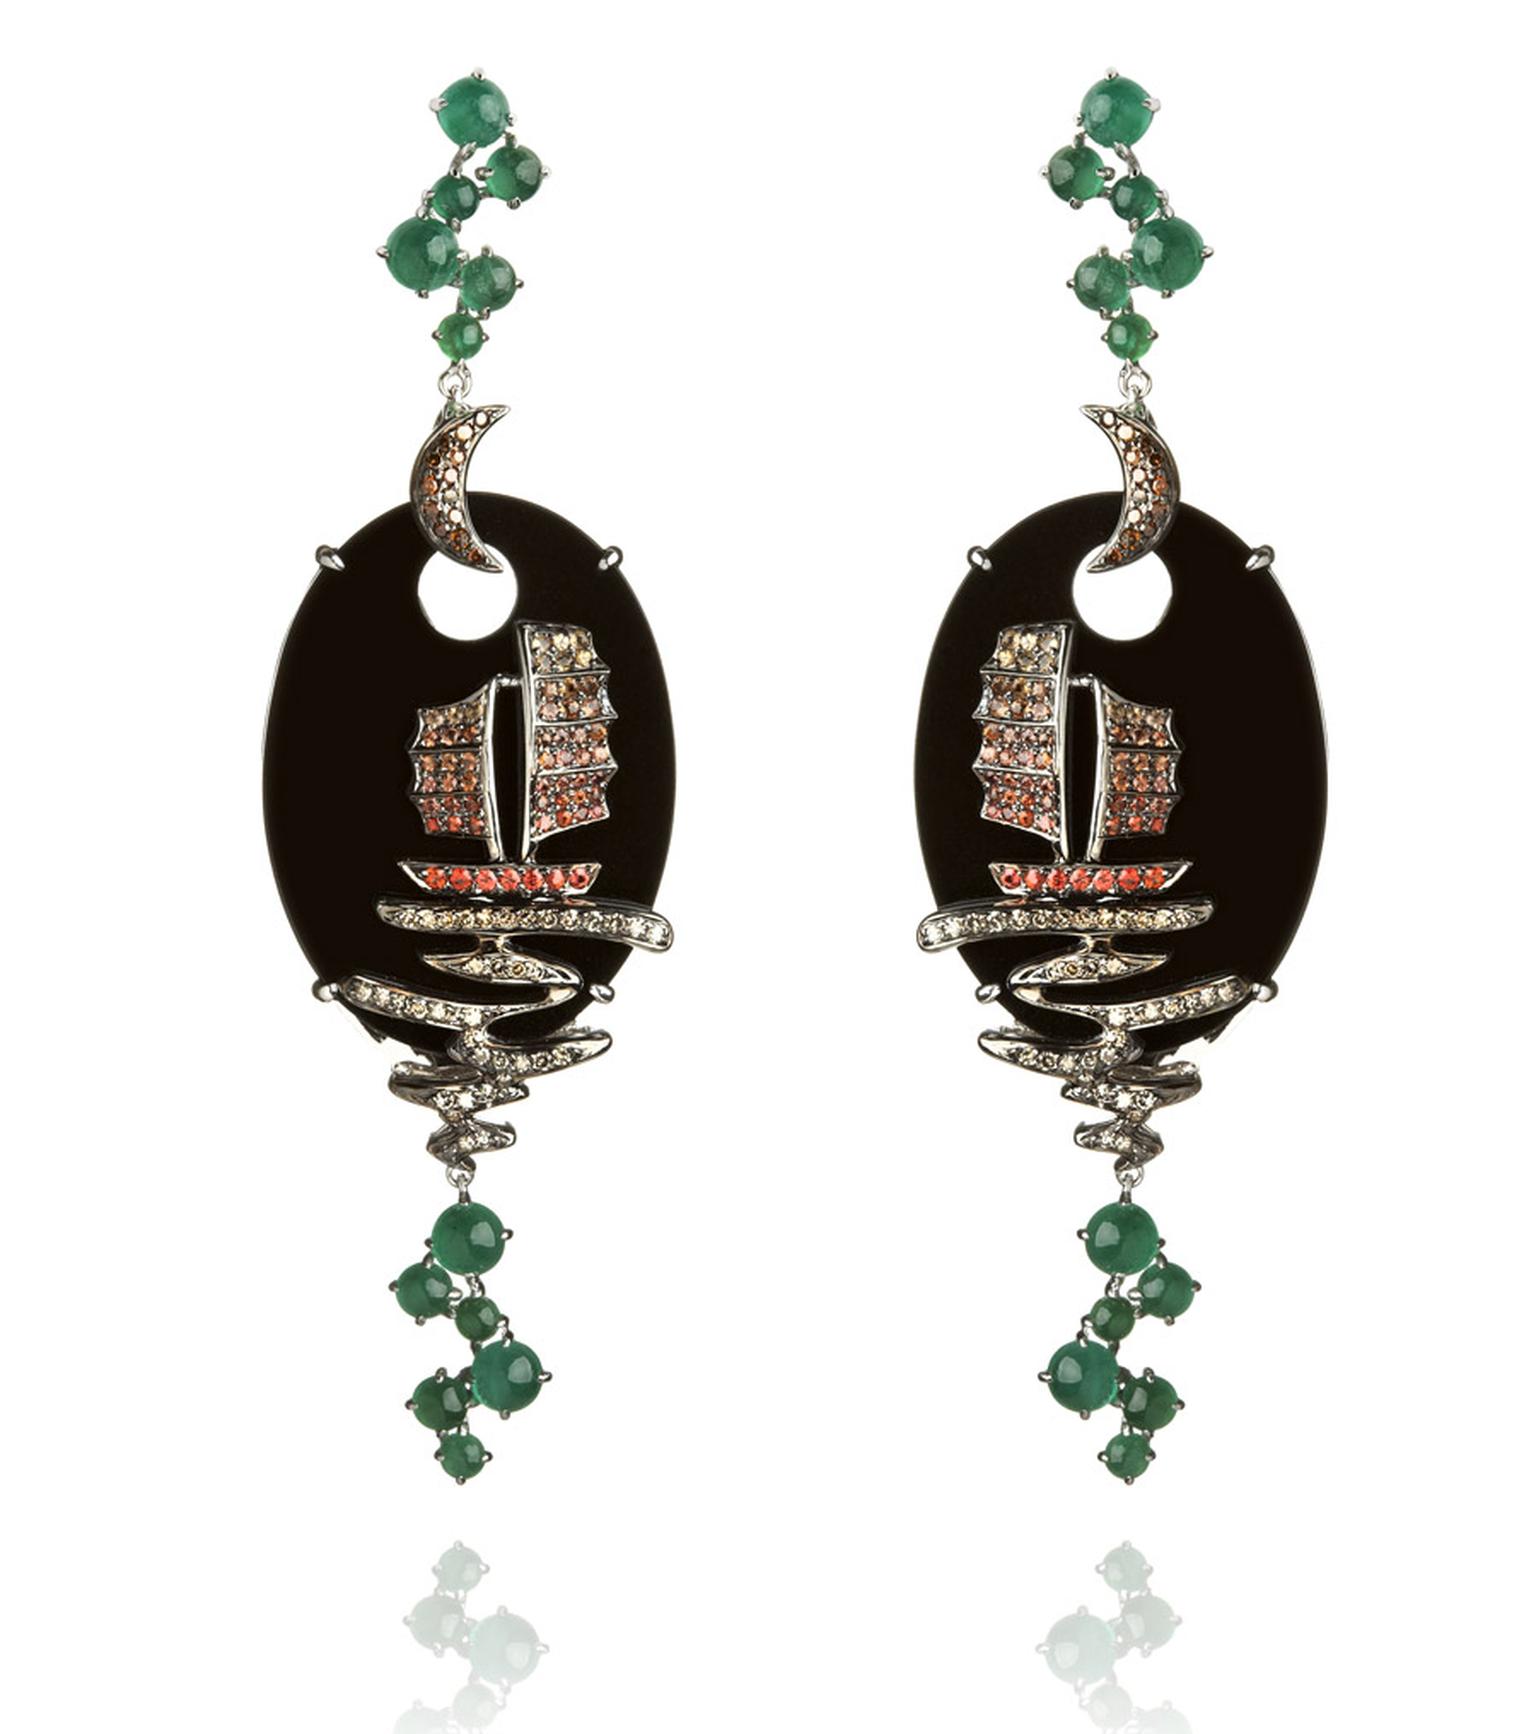 Wendy-Yue-Fantasie-18ct-white-gold,--diamond,-sapphire-and-emerald-Night-Ship-earrings-By-Wendy-Yue-for--Annnoushka.jpg